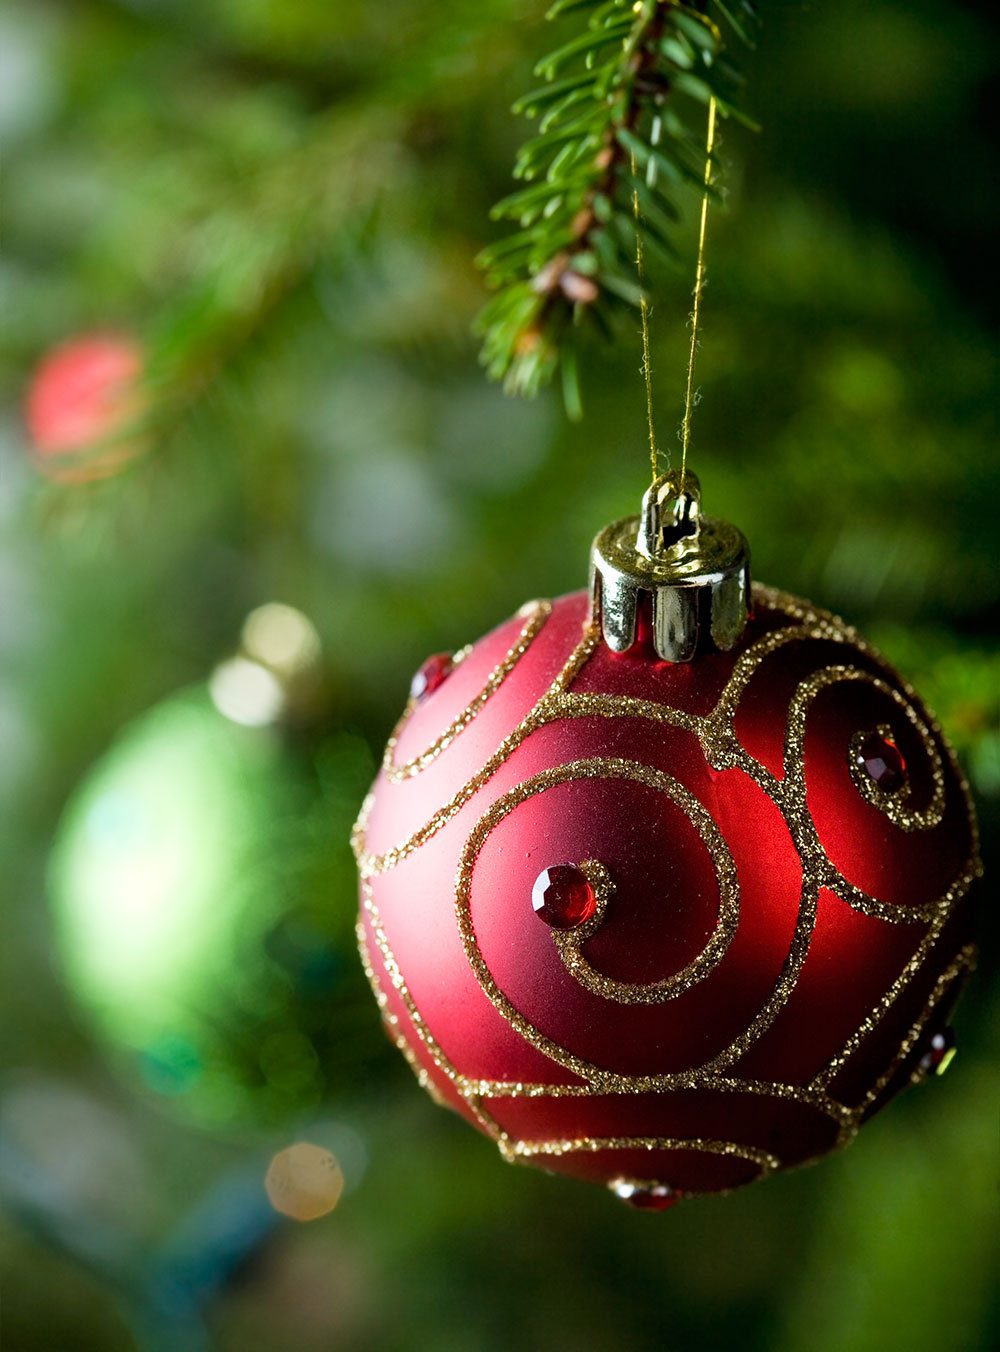 How to Photograph Holiday Ornaments :: Digital Photo Secrets